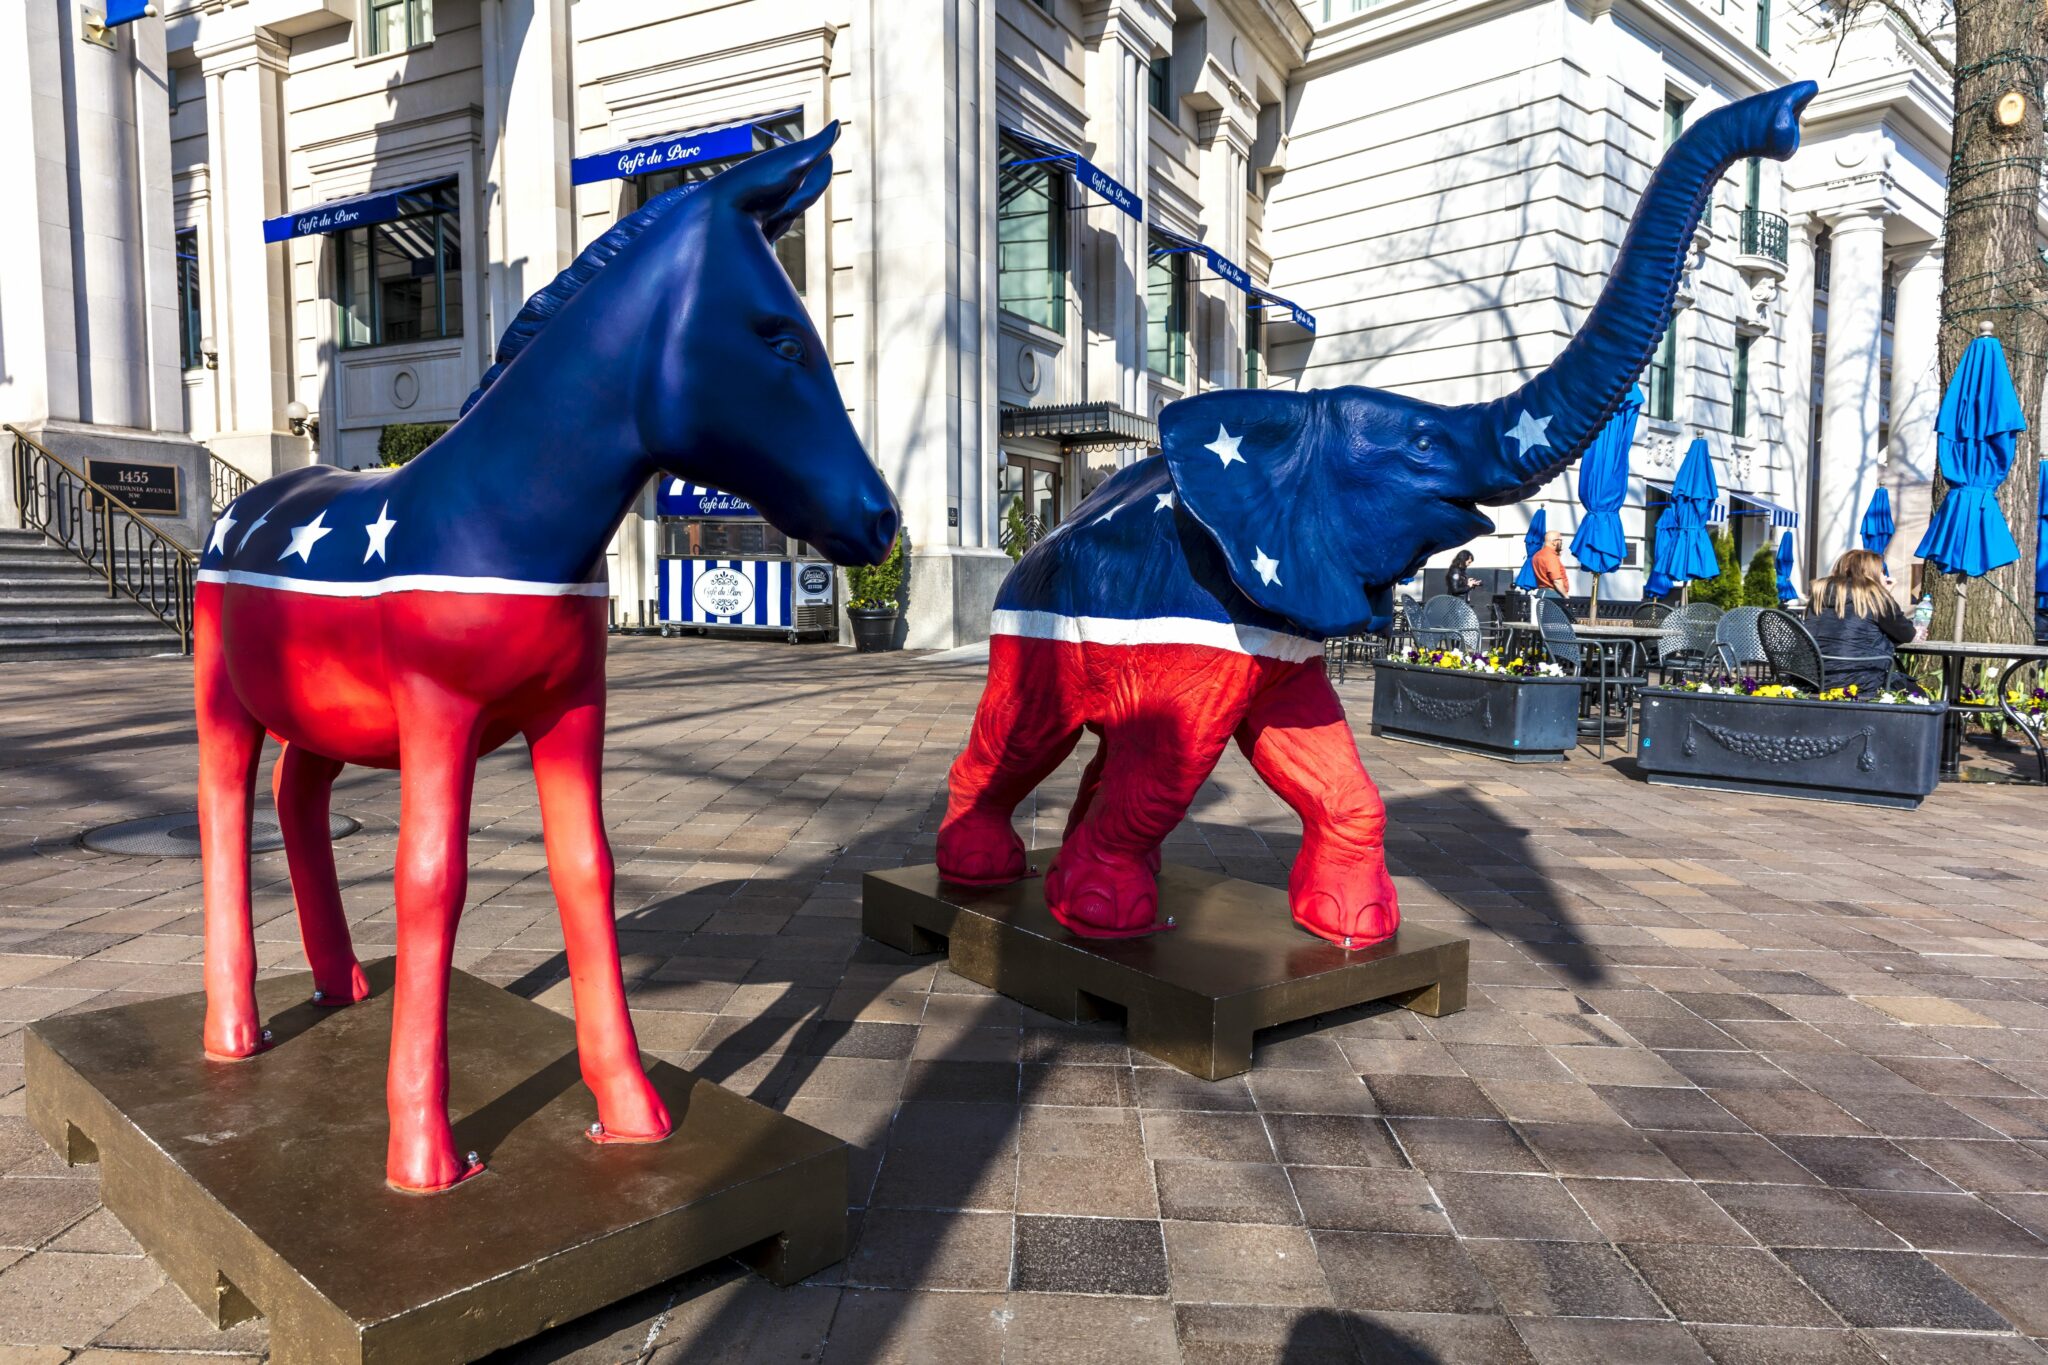 WASHINGTON DC, Democratic Mule and Republican Elephant statues symbolize American 2-part Political system in front of Willard Hotel. (Photo by: Visions of America/Universal Images Group via Getty Images)